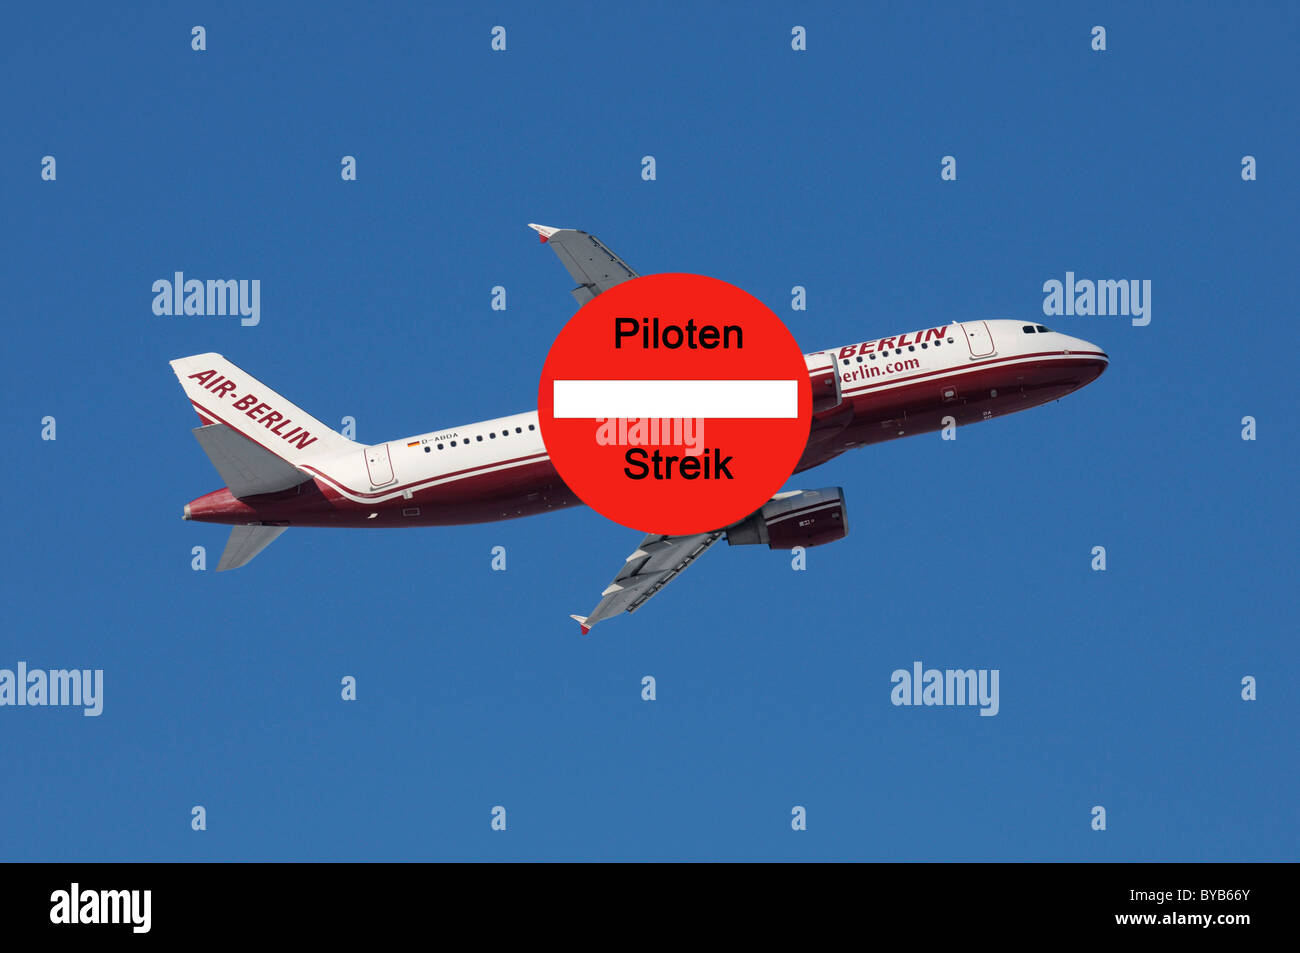 Aircraft with strike sign, symbolic image for pilot strike at airberlin Stock Photo